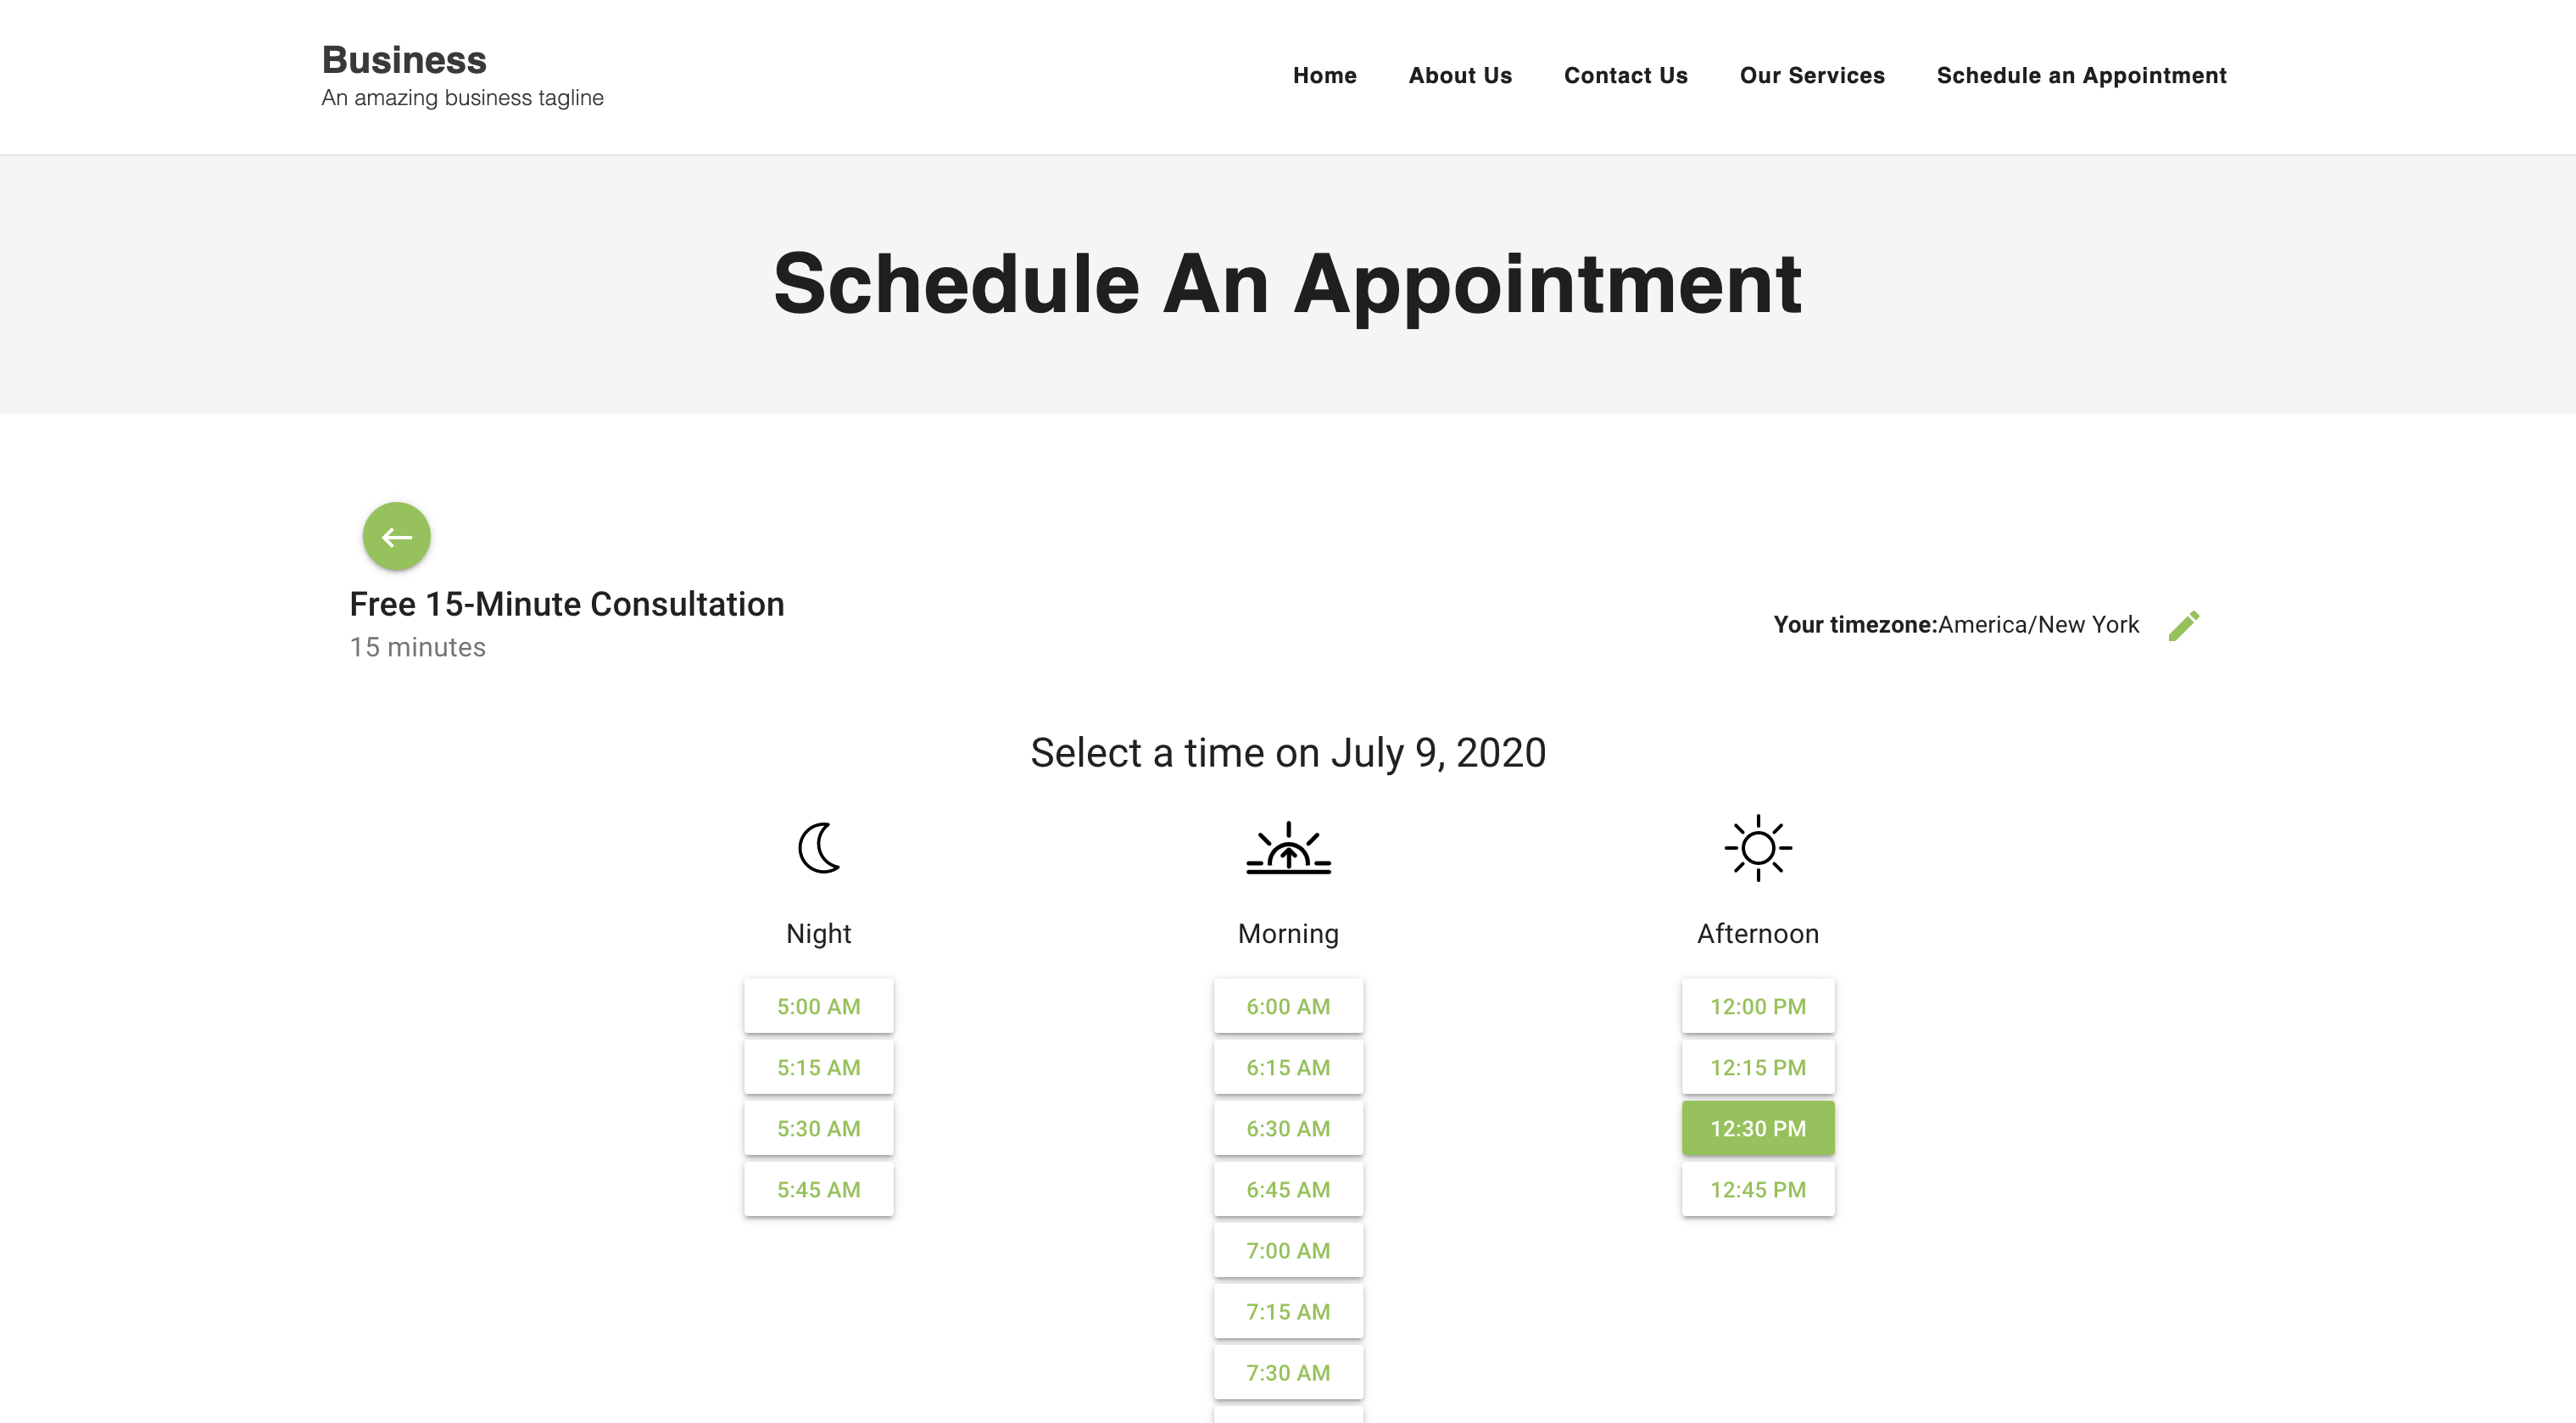 Schedule an Appointment using the built-in Booking Form.